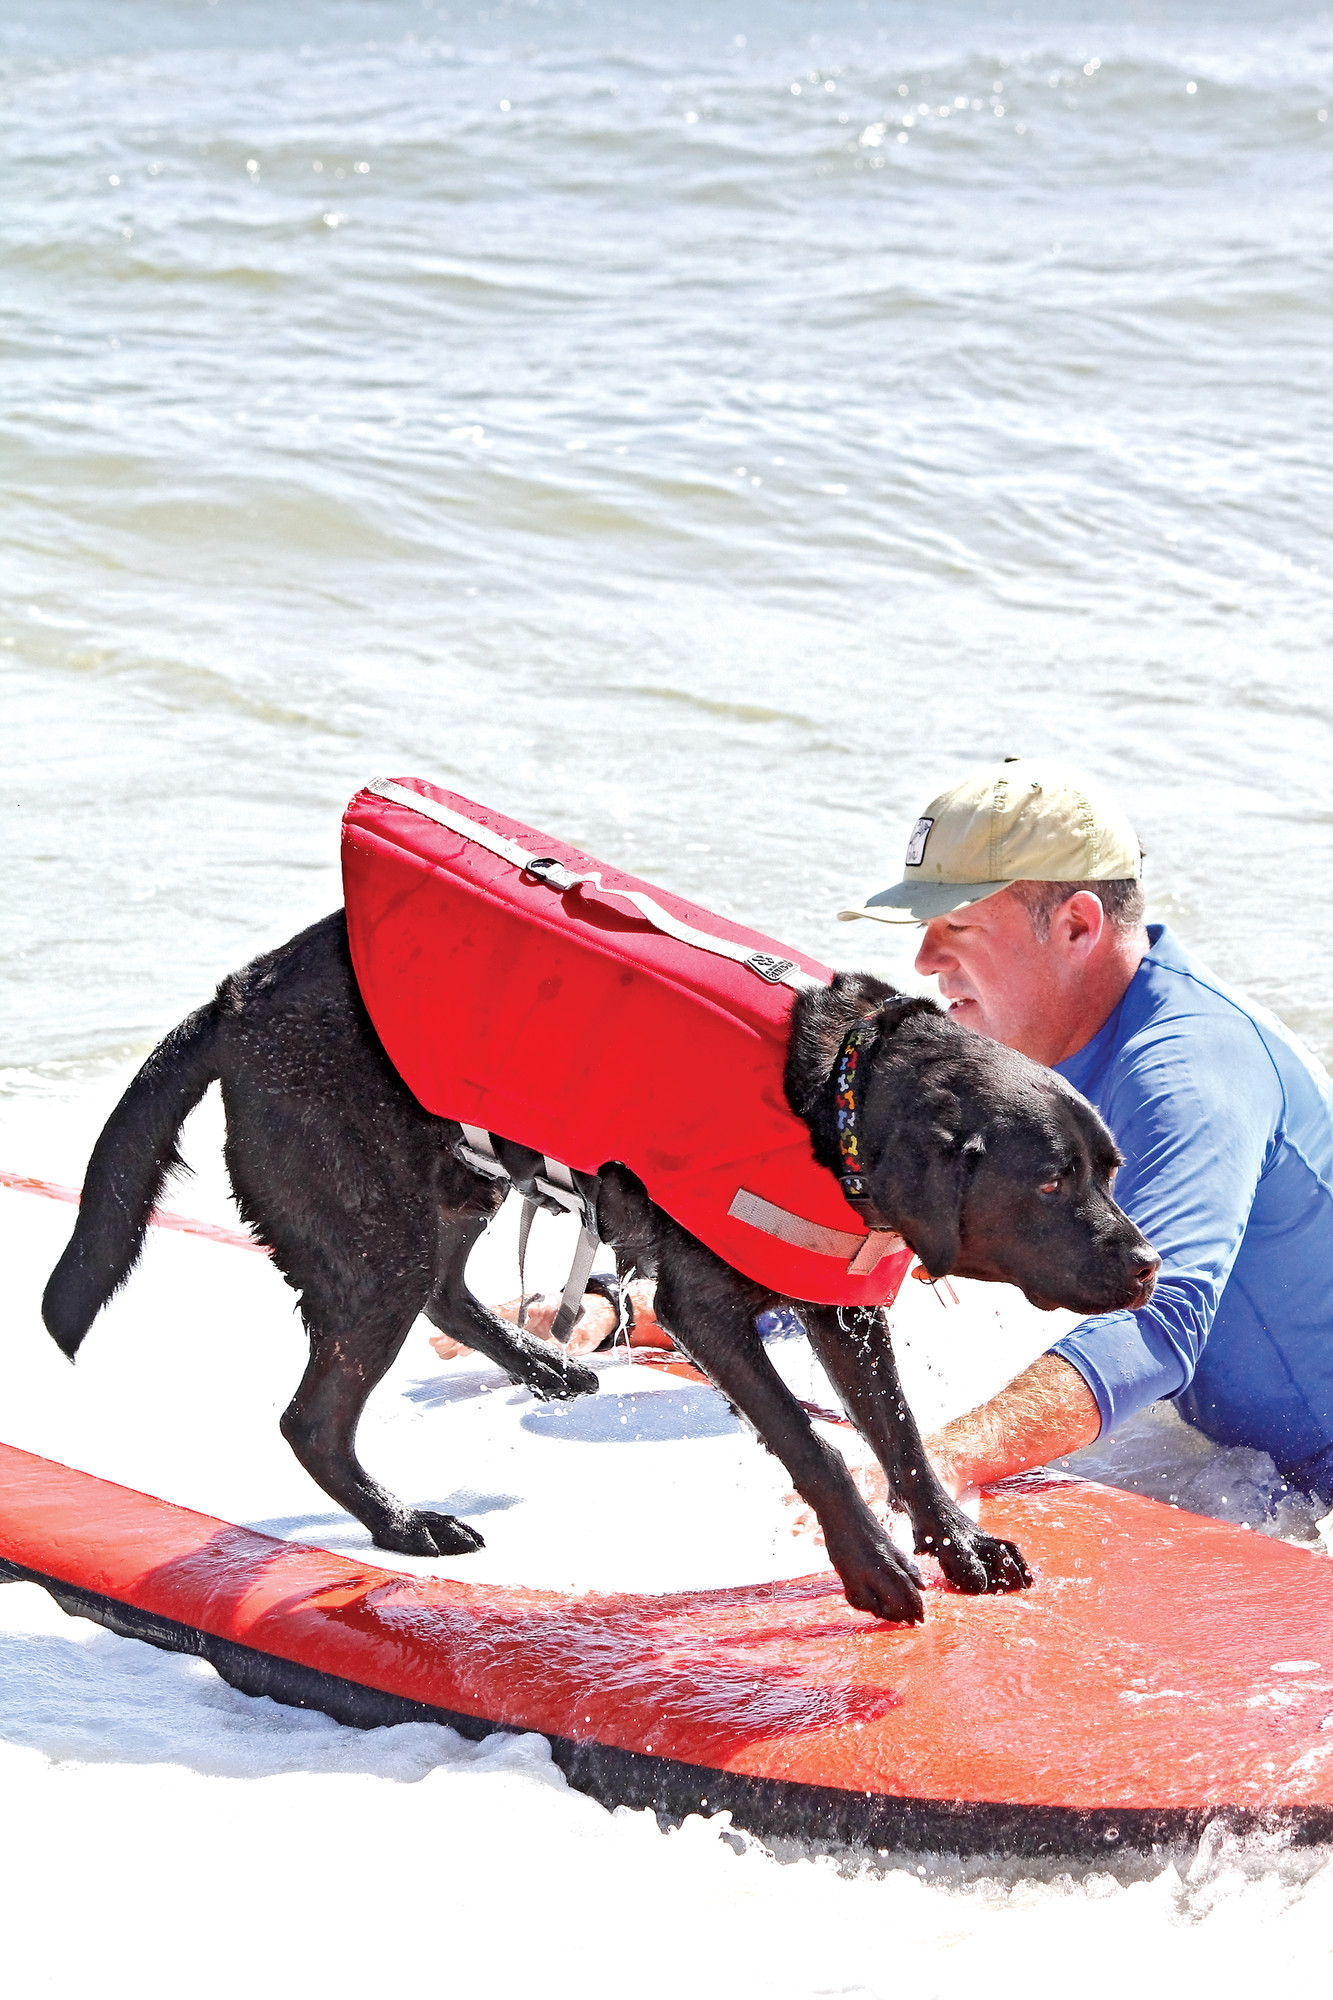 Norm the surfing dog was on hand to raise money and awareness for the Tommy Brull Foundation and Camp Anchor.